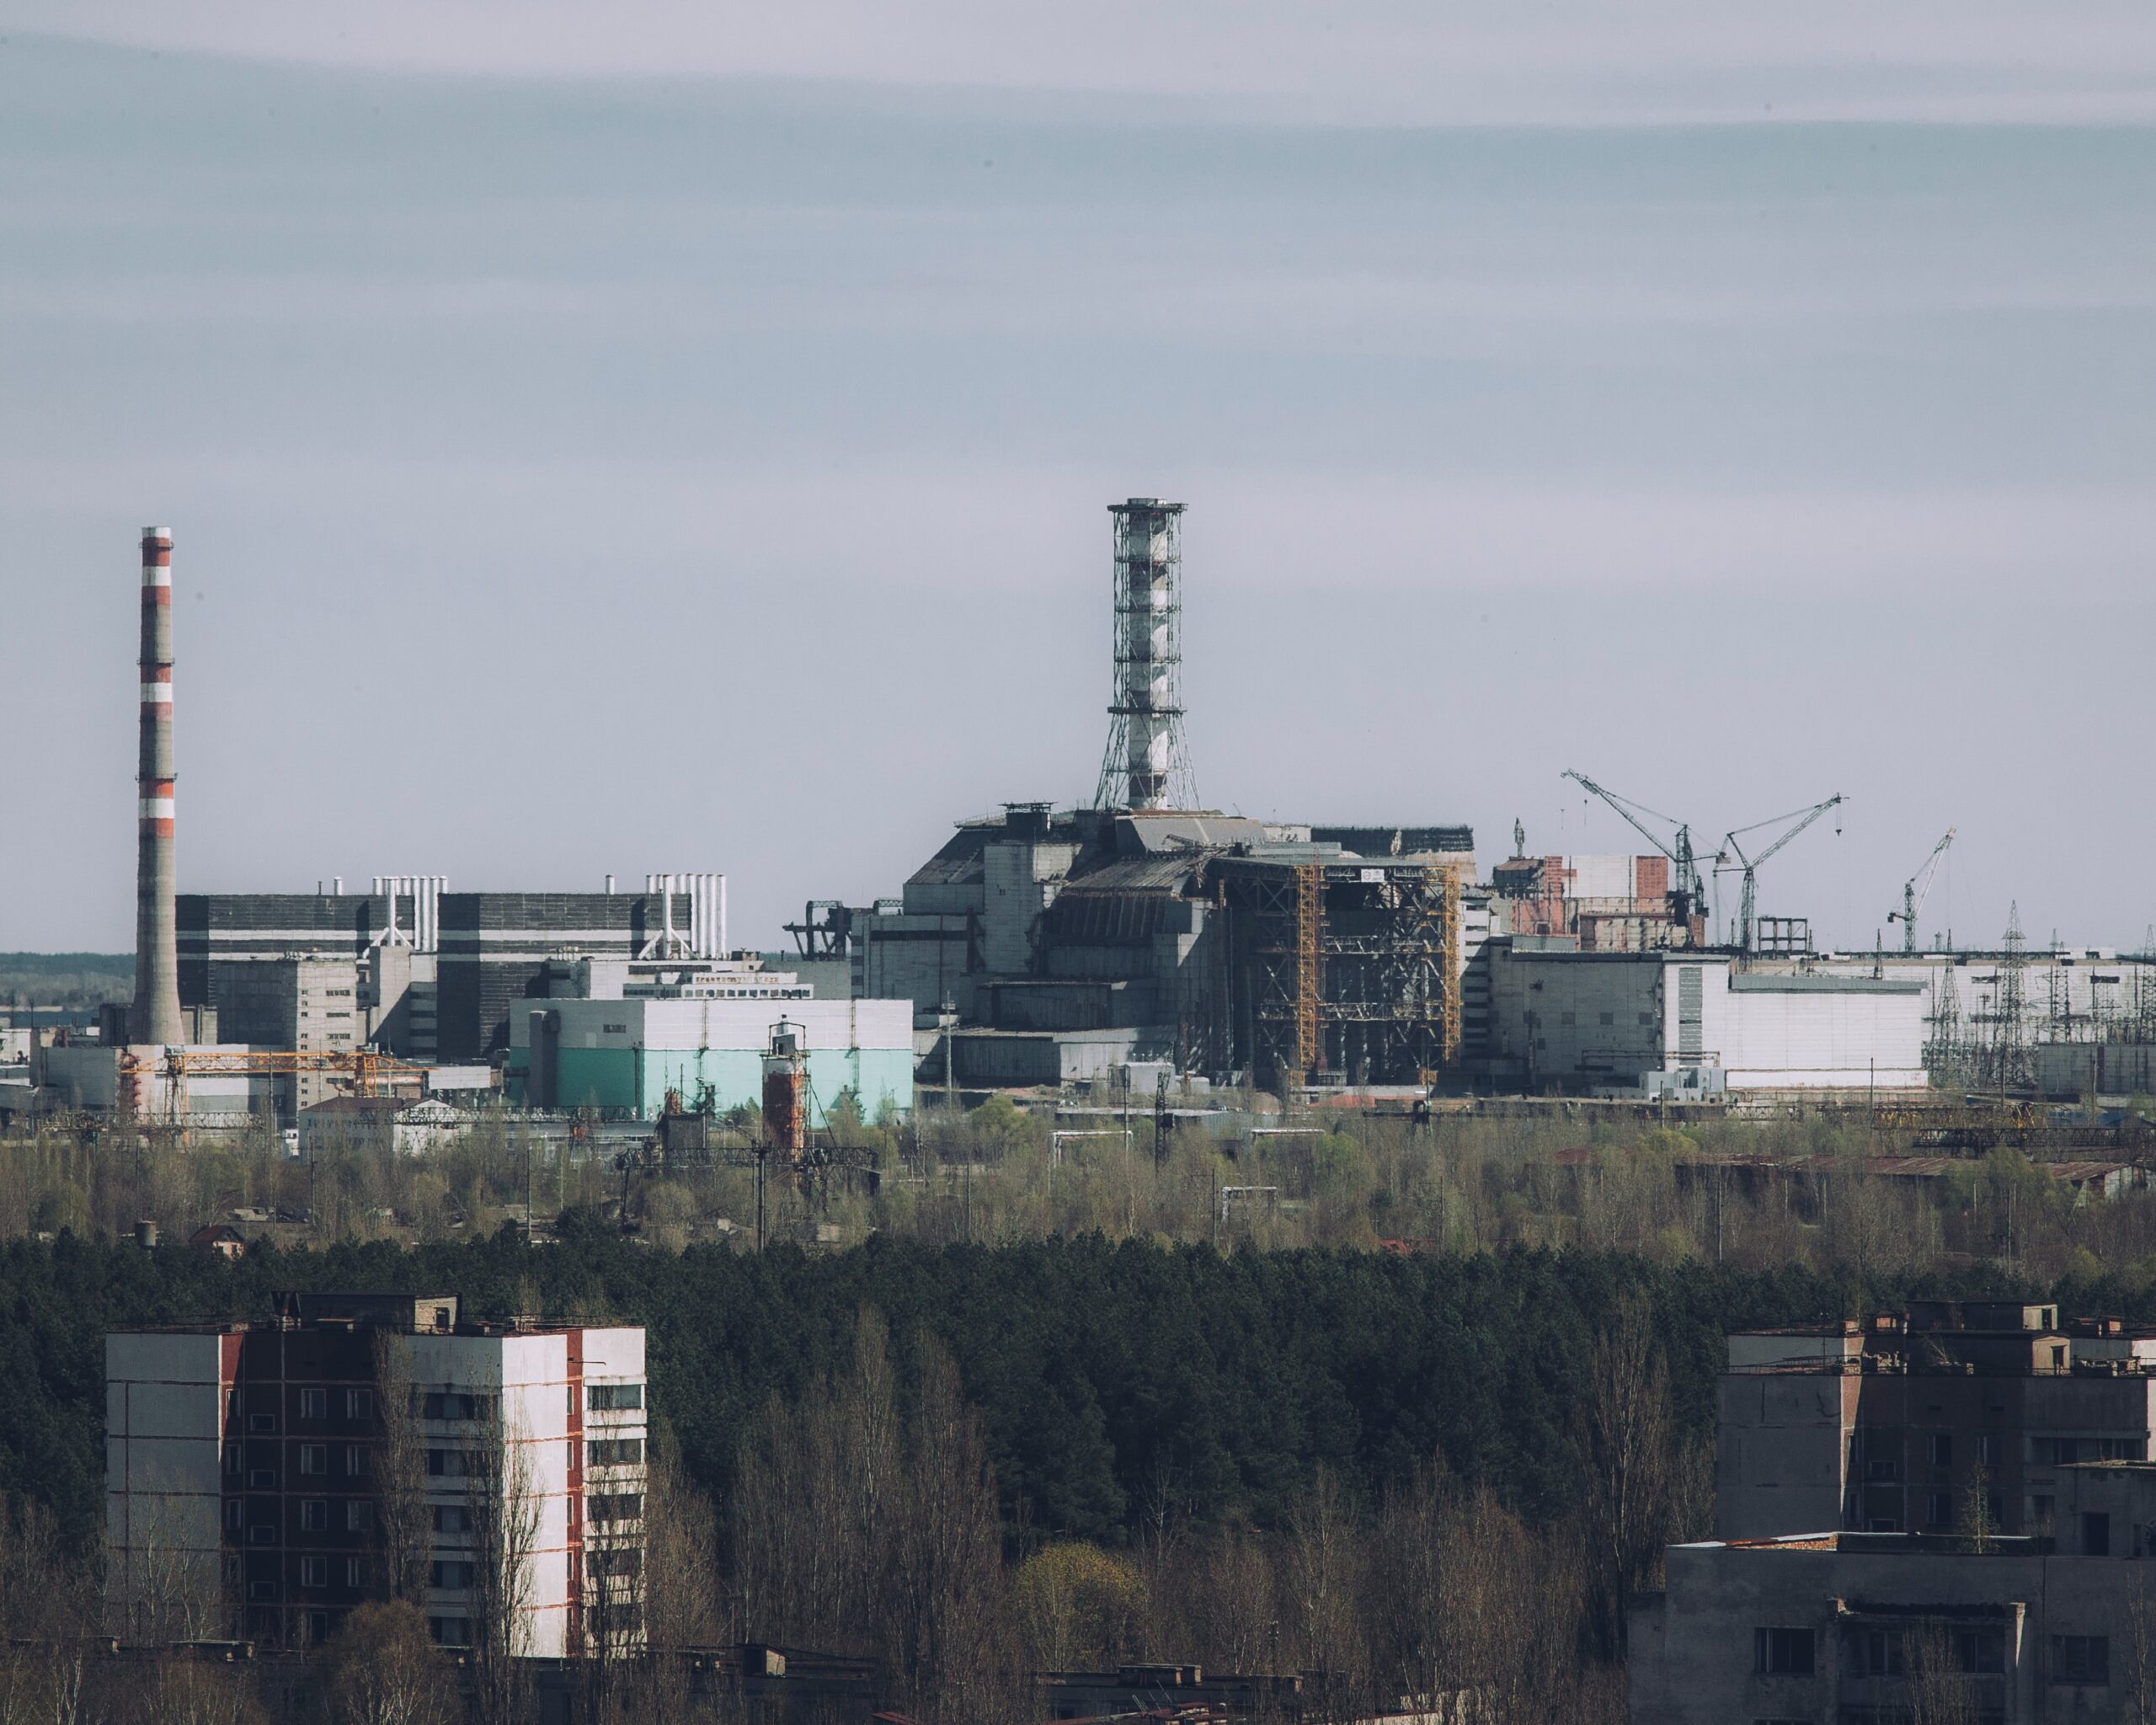 The infamous Chernobyl nuclear power station in Ukraine, which has also been captured by Russian forces.